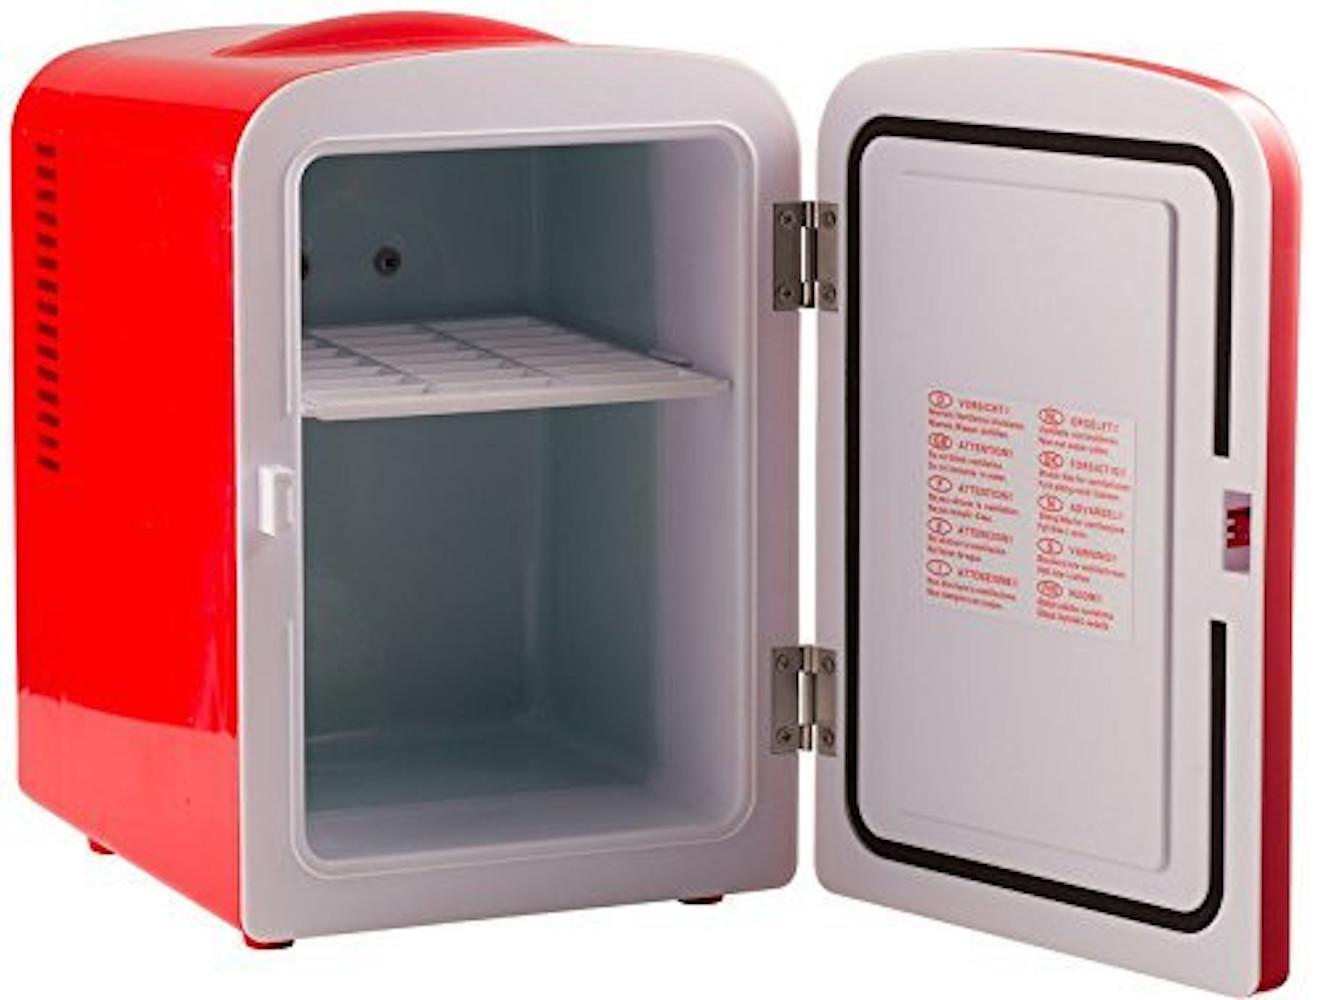 Uber Appliance Chill 6-can Retro Portable Mini Fridge Red Thermoelectric - image 3 of 18